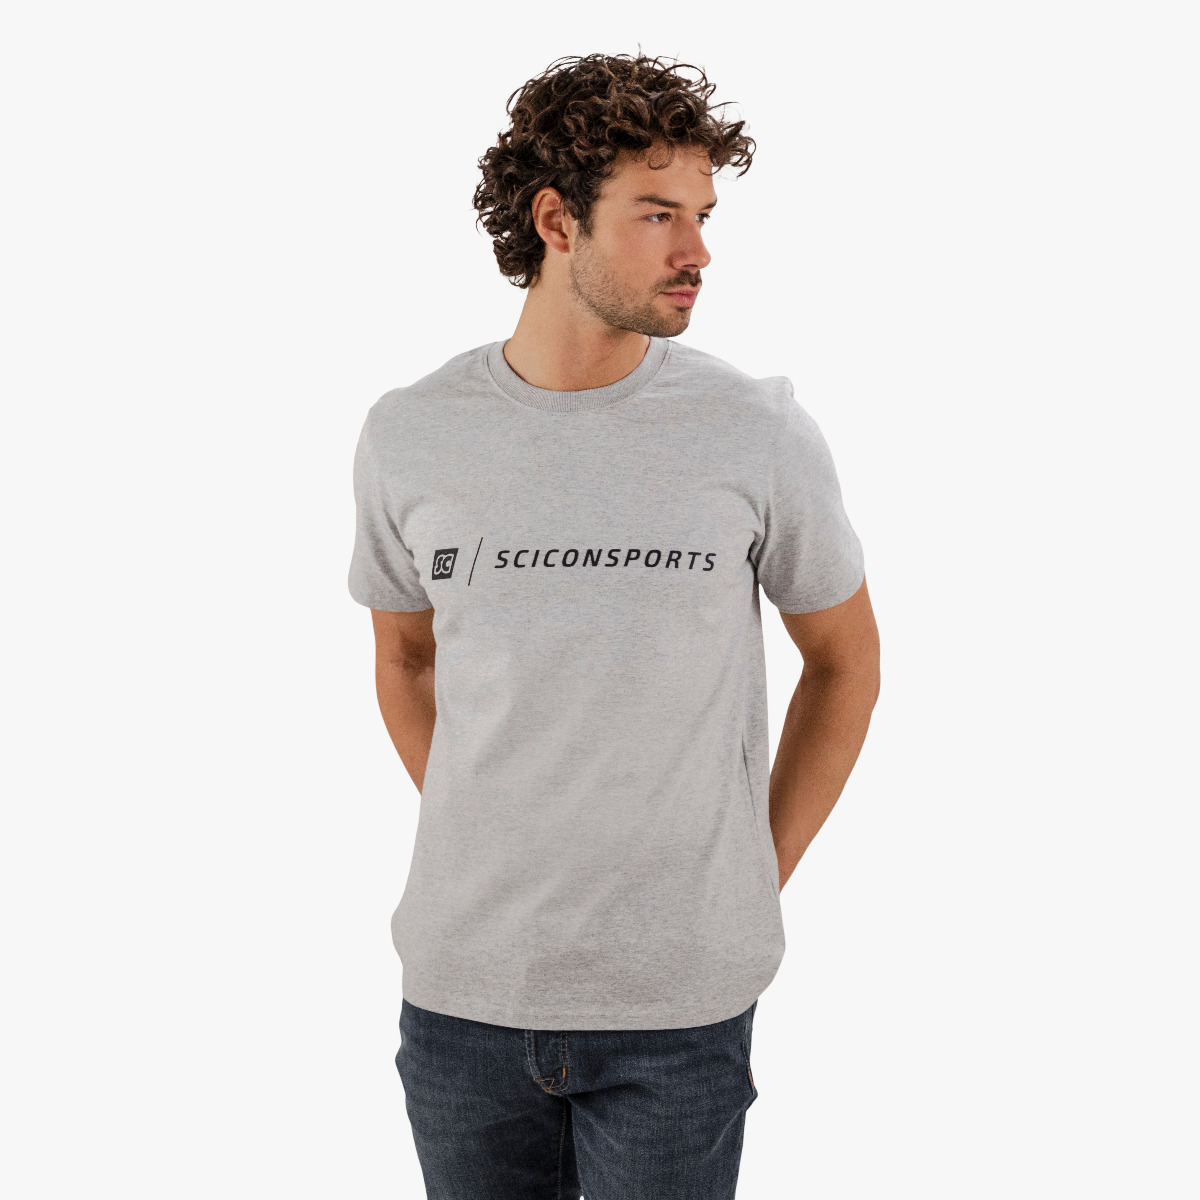 SCICONSPORTS T-SHIRT